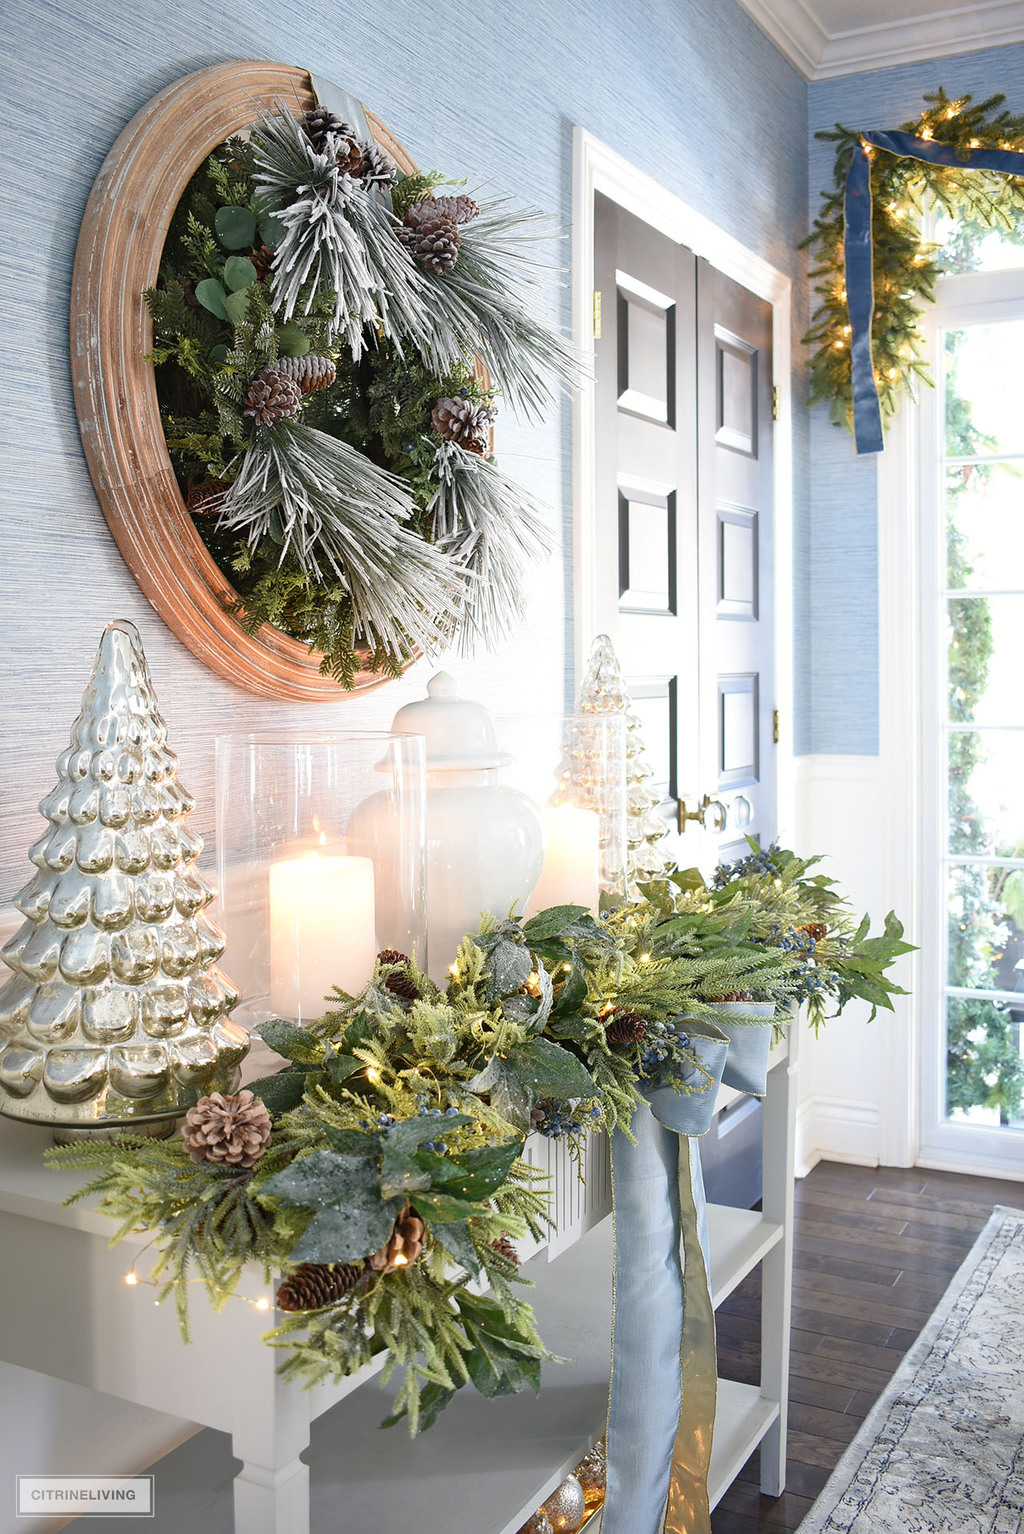 Christmas decorated entryway table with lush greenery, mercury glass trees, hurricane lanterns.